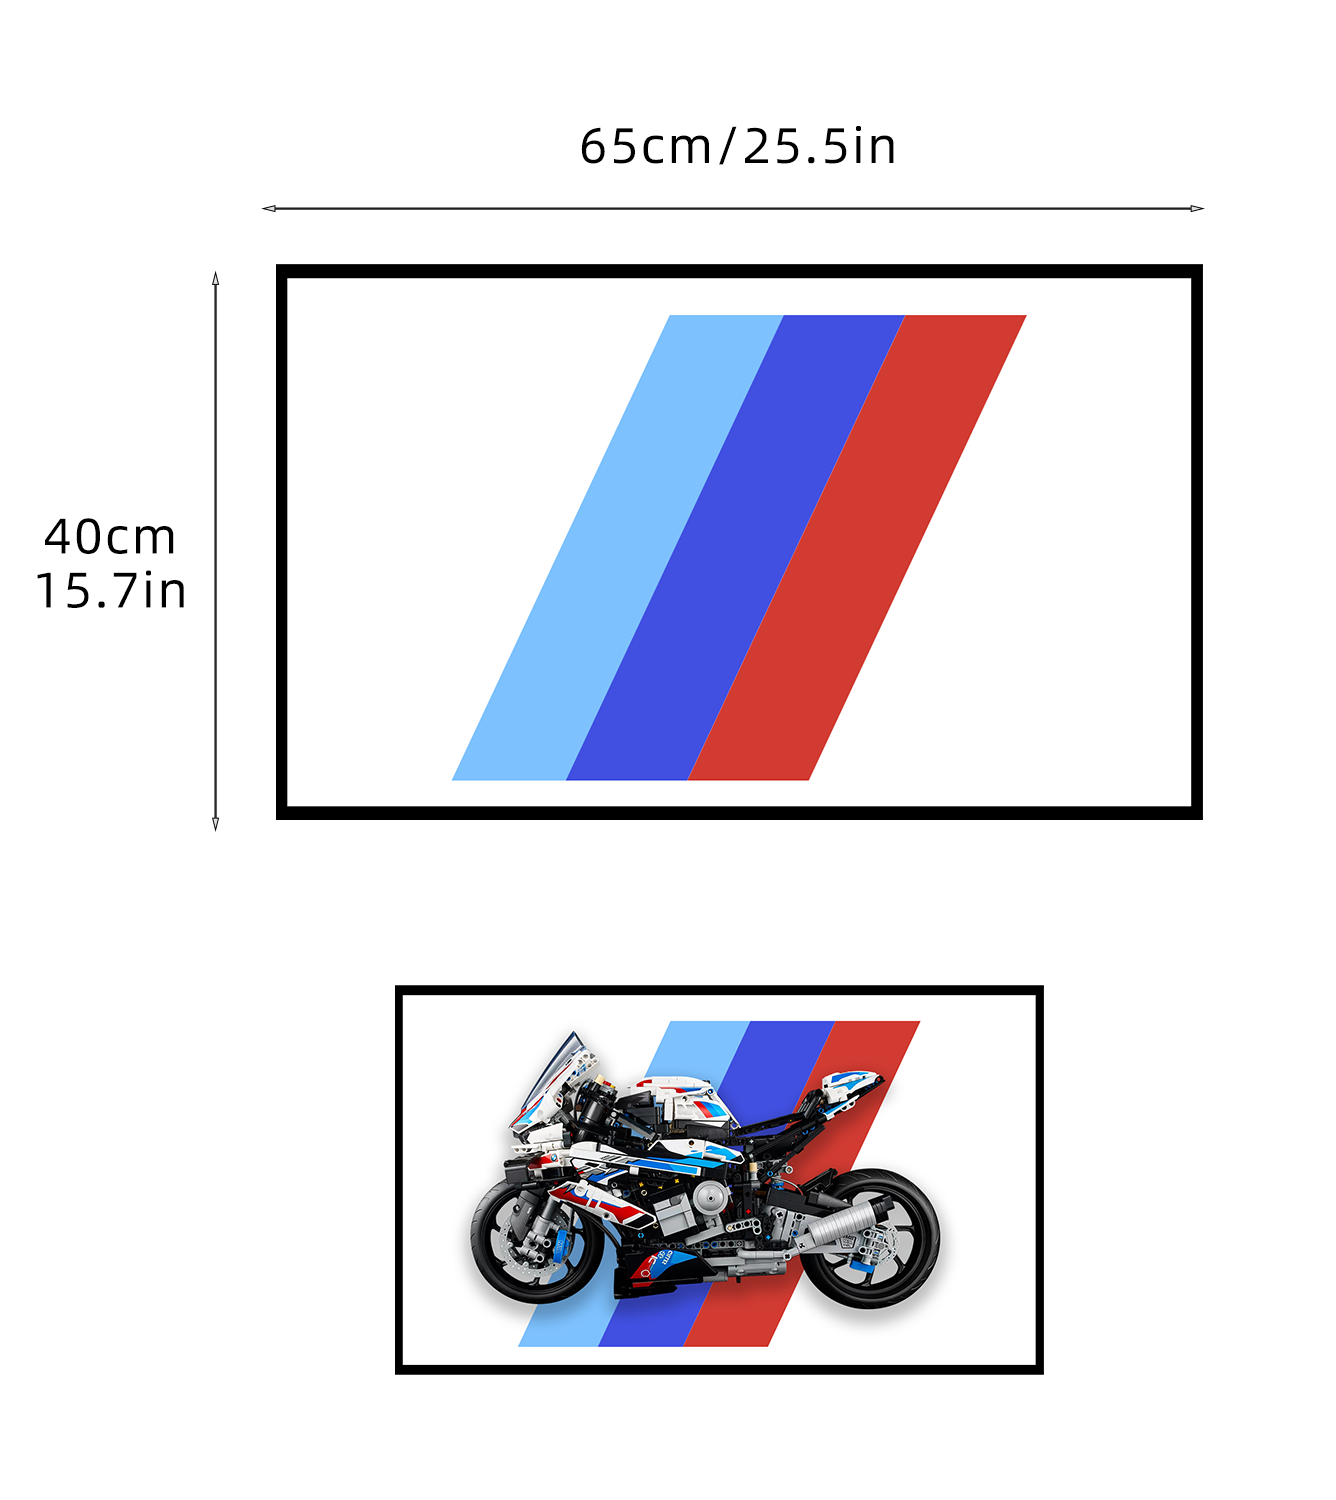 Display Wall Mount for Lego 42130 Technic™ BMW M 1000 RR lego Motorcycle